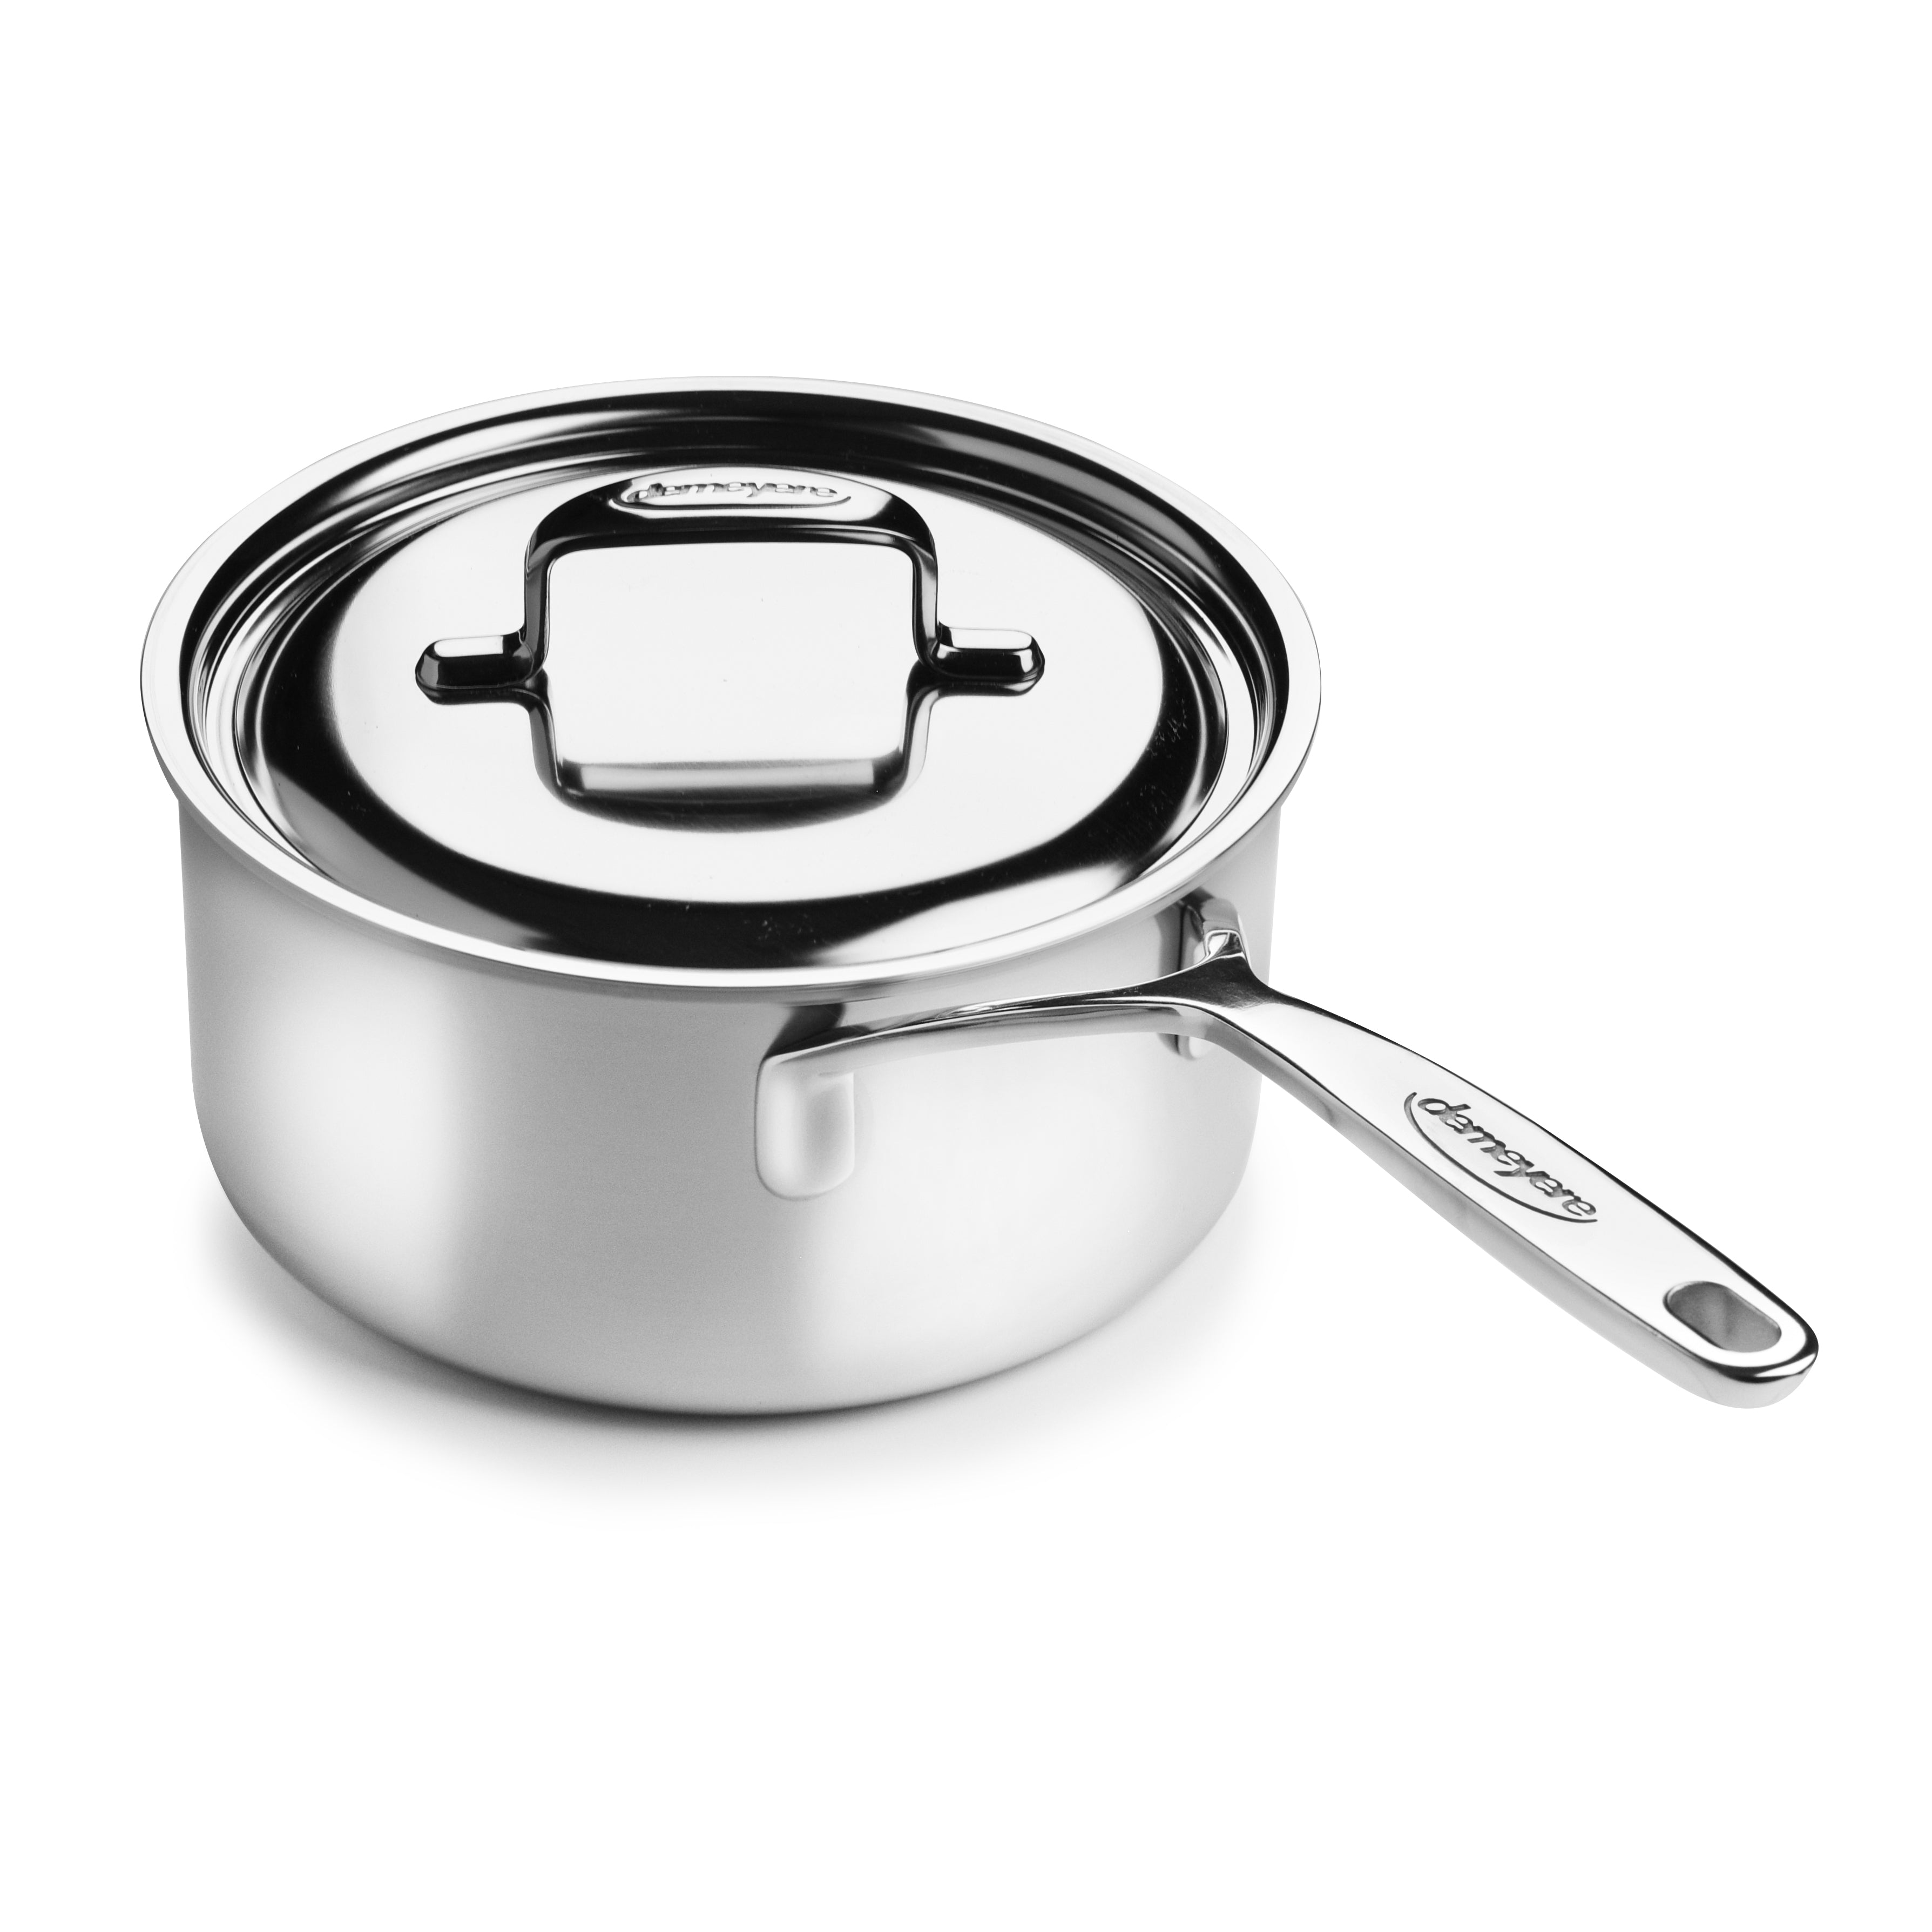 All-Clad Stainless Steel 3-Quart Sauce Pan with Lid